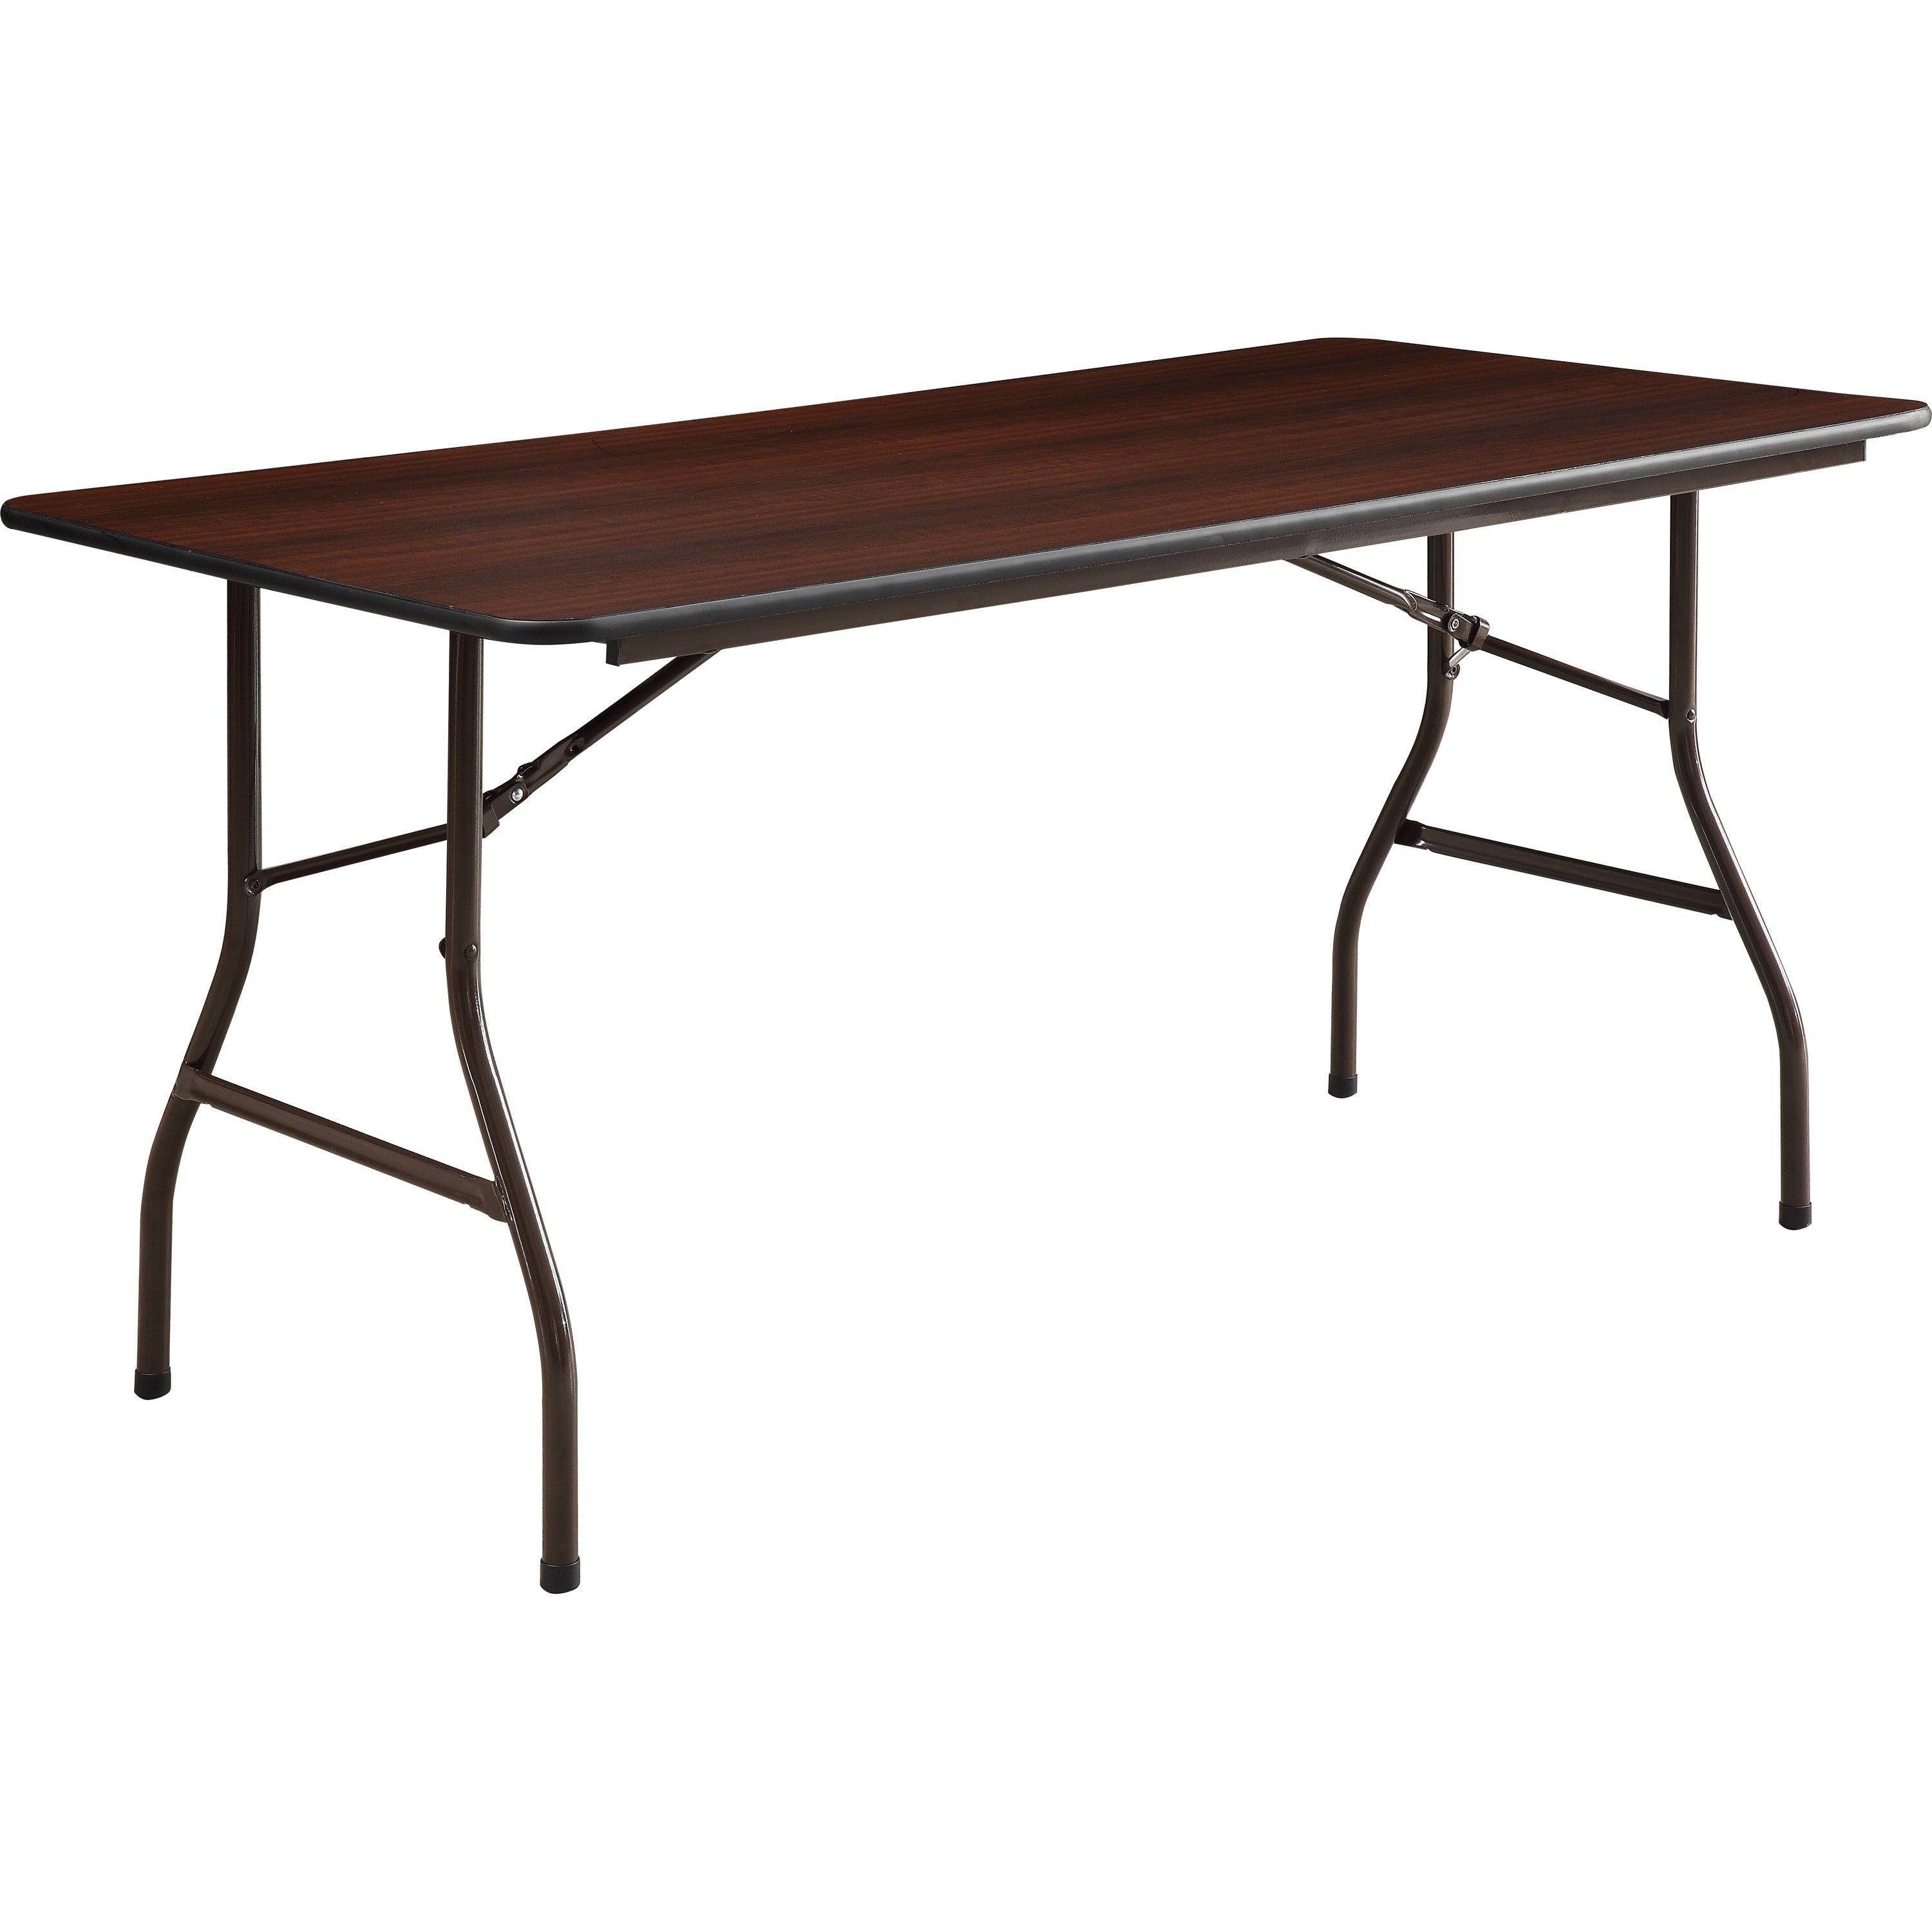 Lorell Economy Folding Table - For - Table TopMelamine Rectangle Top - 500 lb Capacity - 60" Table Top Length x 30" Table Top Width x 0.63" Table Top Thickness - 29" Height - Mahogany - 1 Each - 